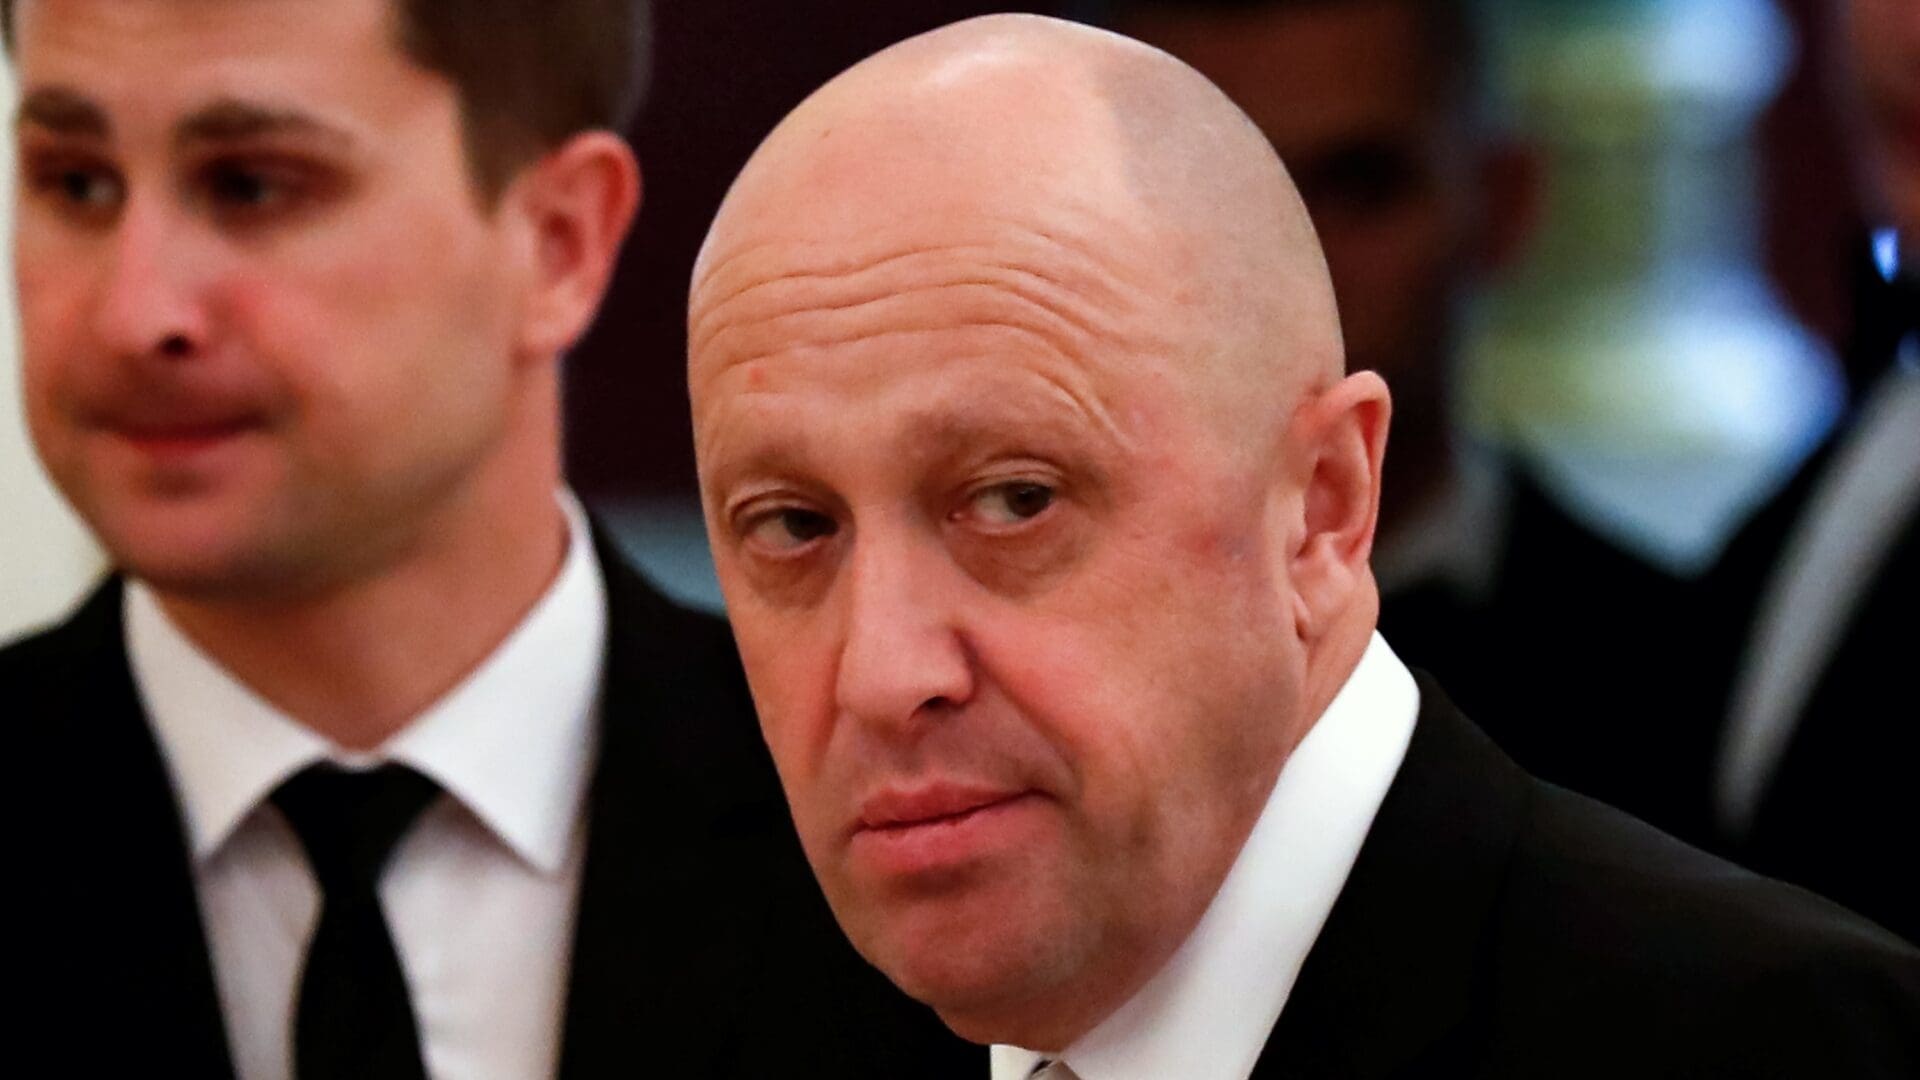 This picture taken on July 4, 2017 shows Russian businessman Yevgeny Prigozhin prior to a meeting with business leaders held by Russian and Chinese presidents at the Kremlin in Moscow. (Photo by Sergei ILNITSKY / POOL / AFP)